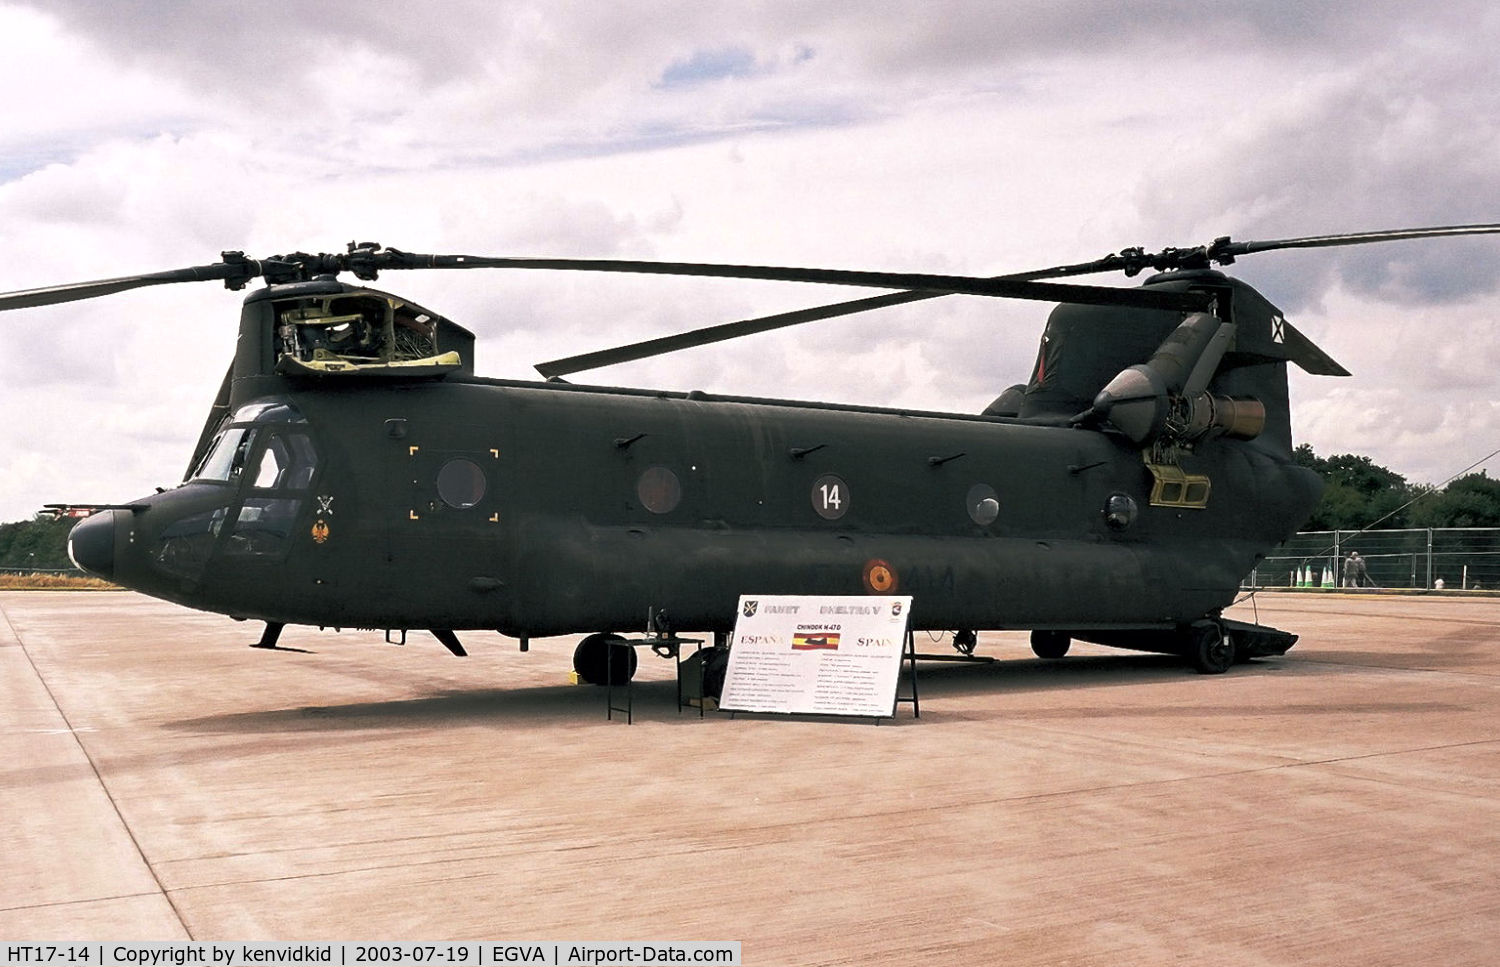 HT17-14, Boeing CH-47D Chinook C/N B870/MA-901, Spanish Air Force at RIAT.